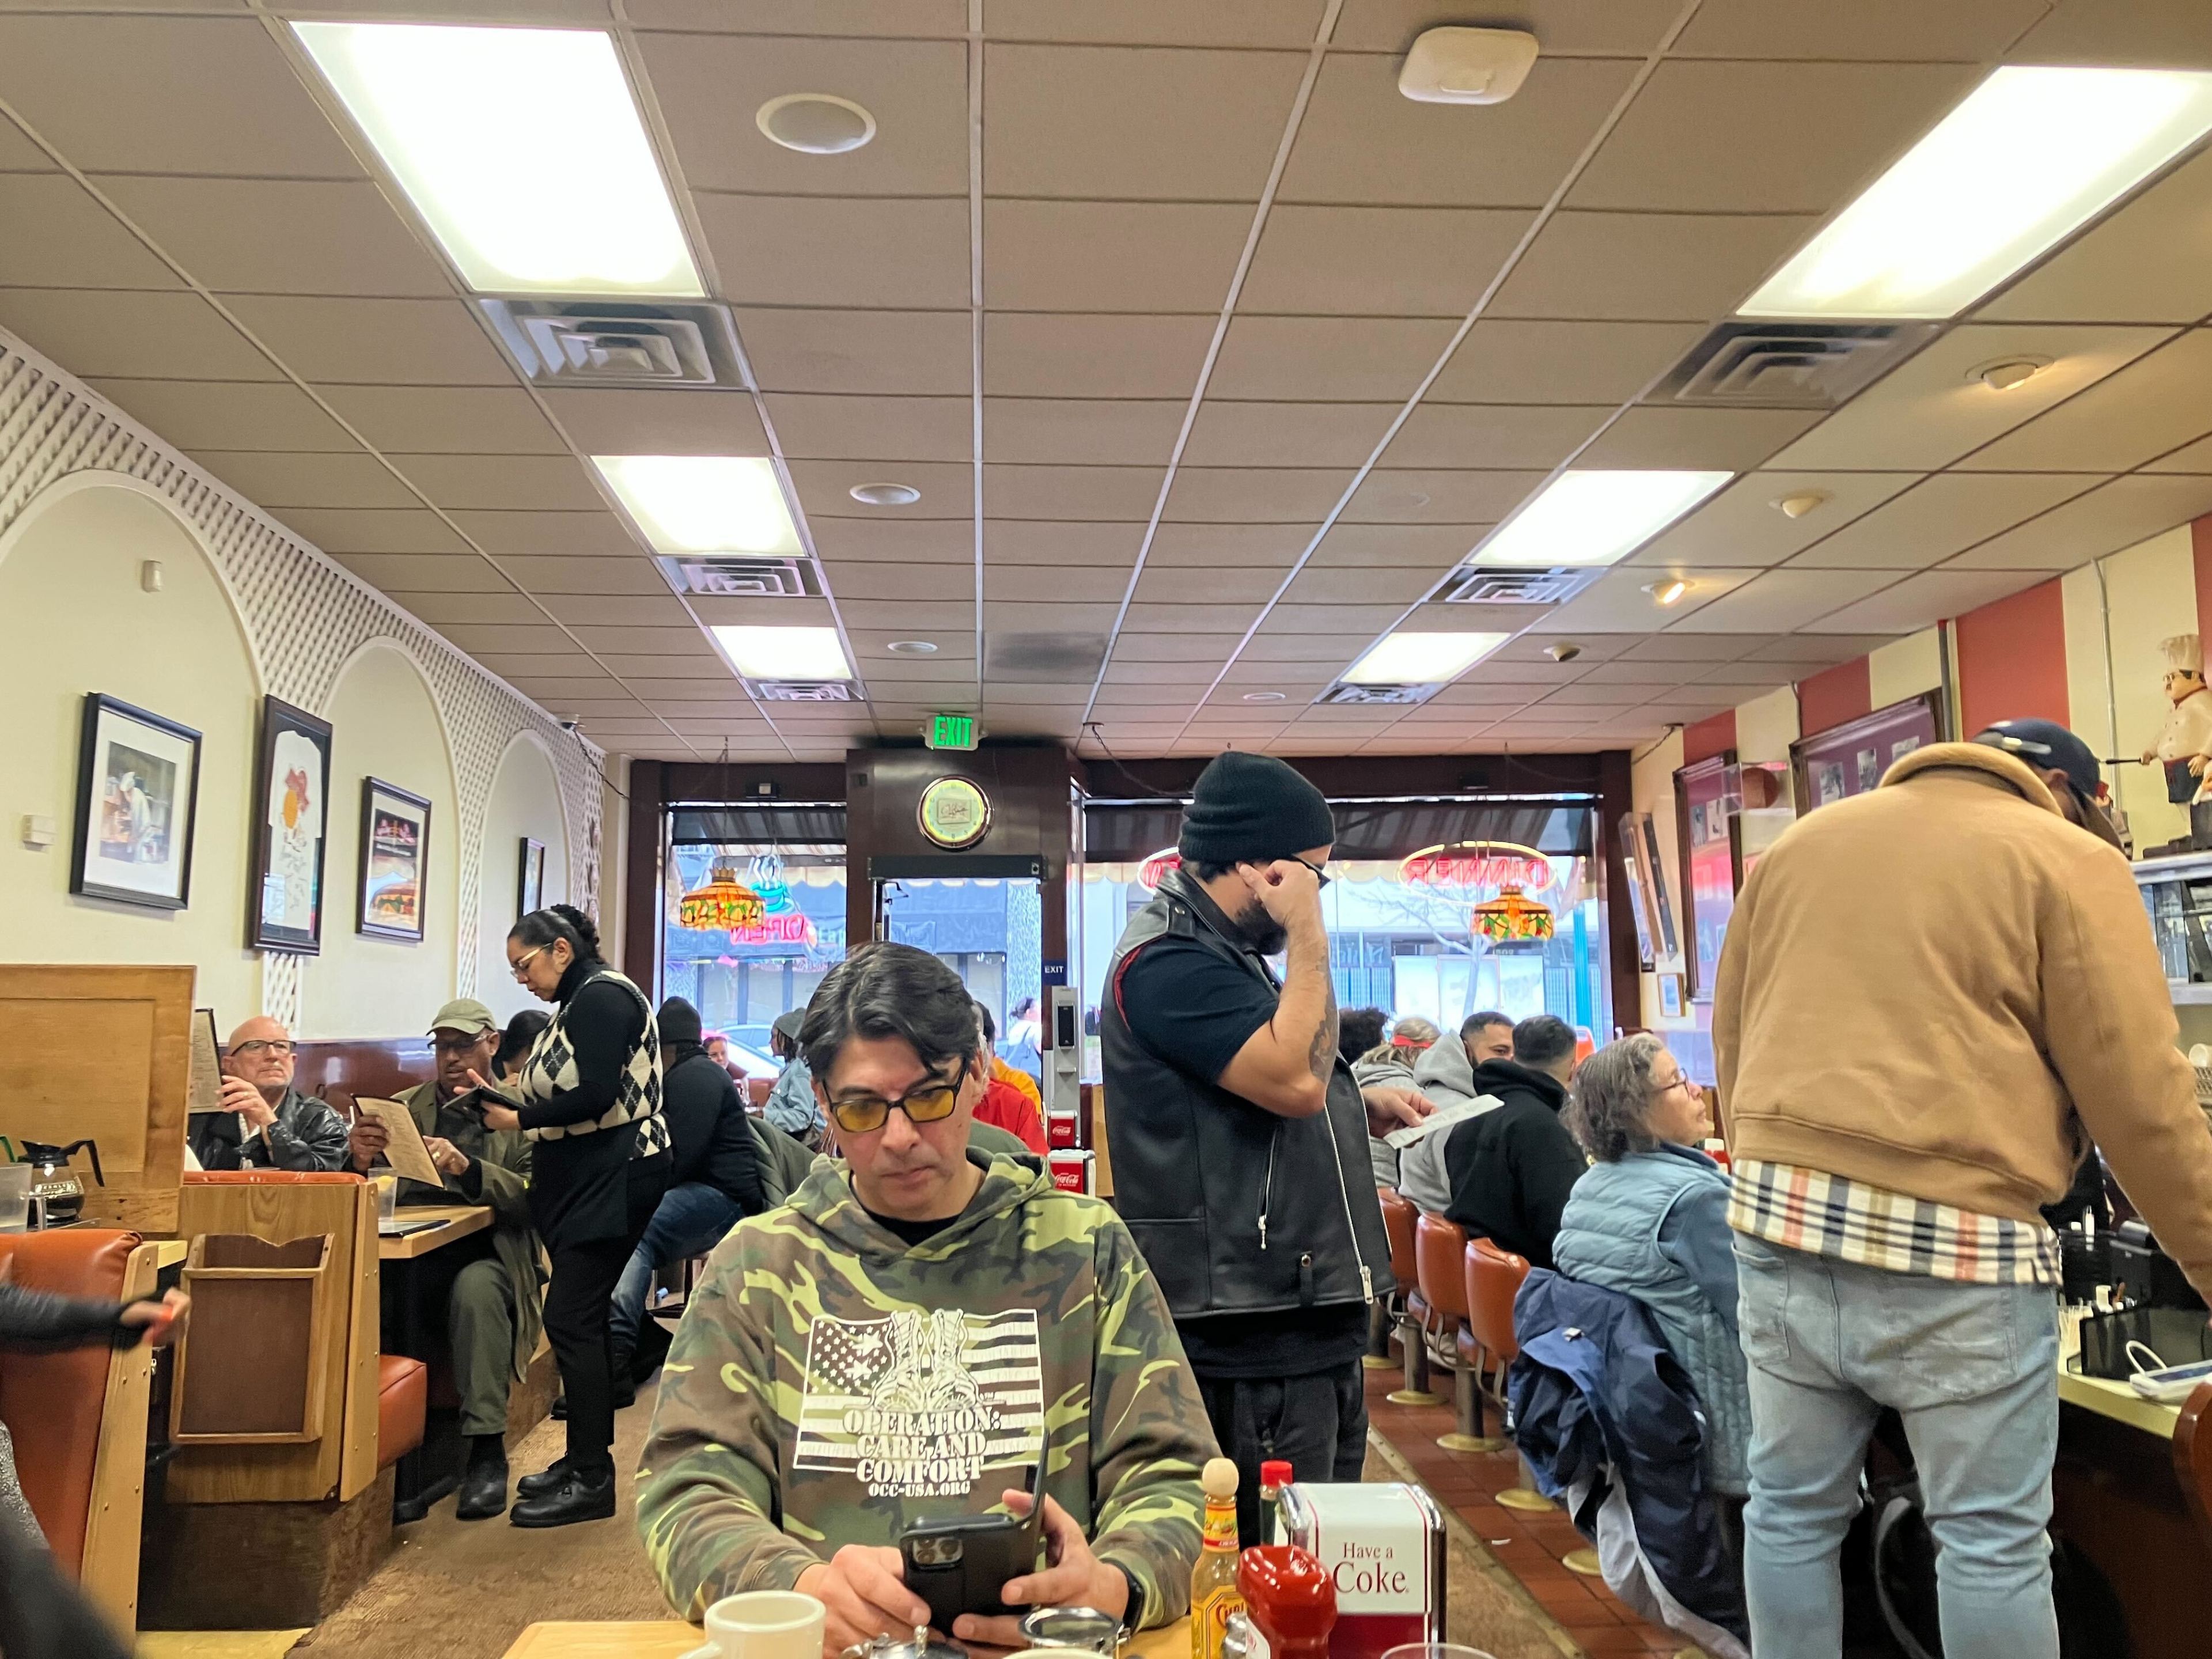 A bustling diner interior with patrons seated and dining, wall art, and a person checking their phone in the foreground.